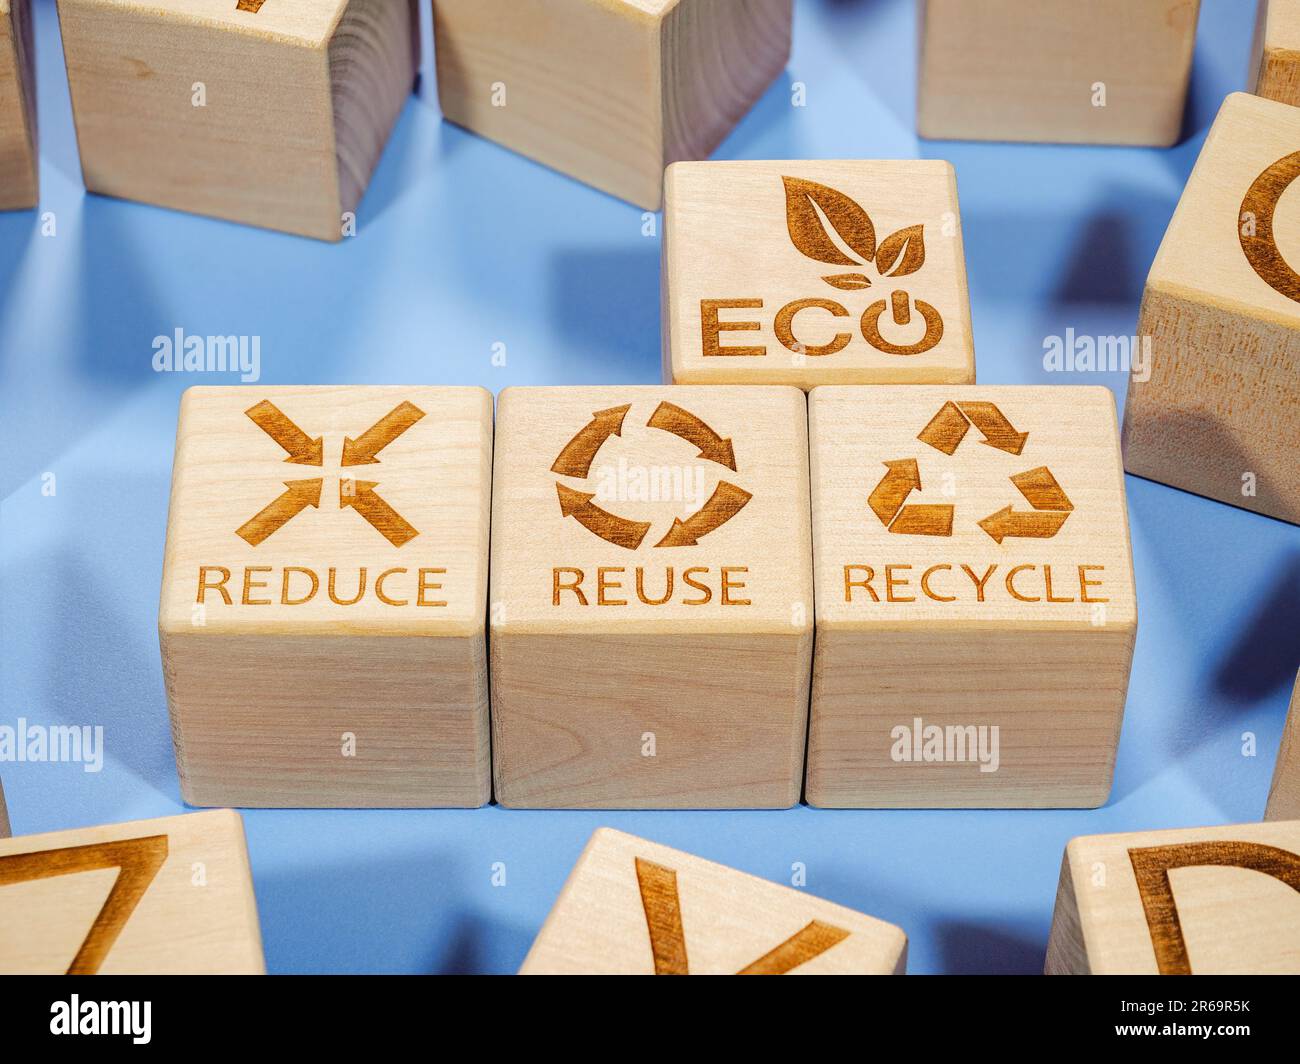 Reduce, Reuse, and Recycle symbols as a conservation-oriented business concept Stock Photo